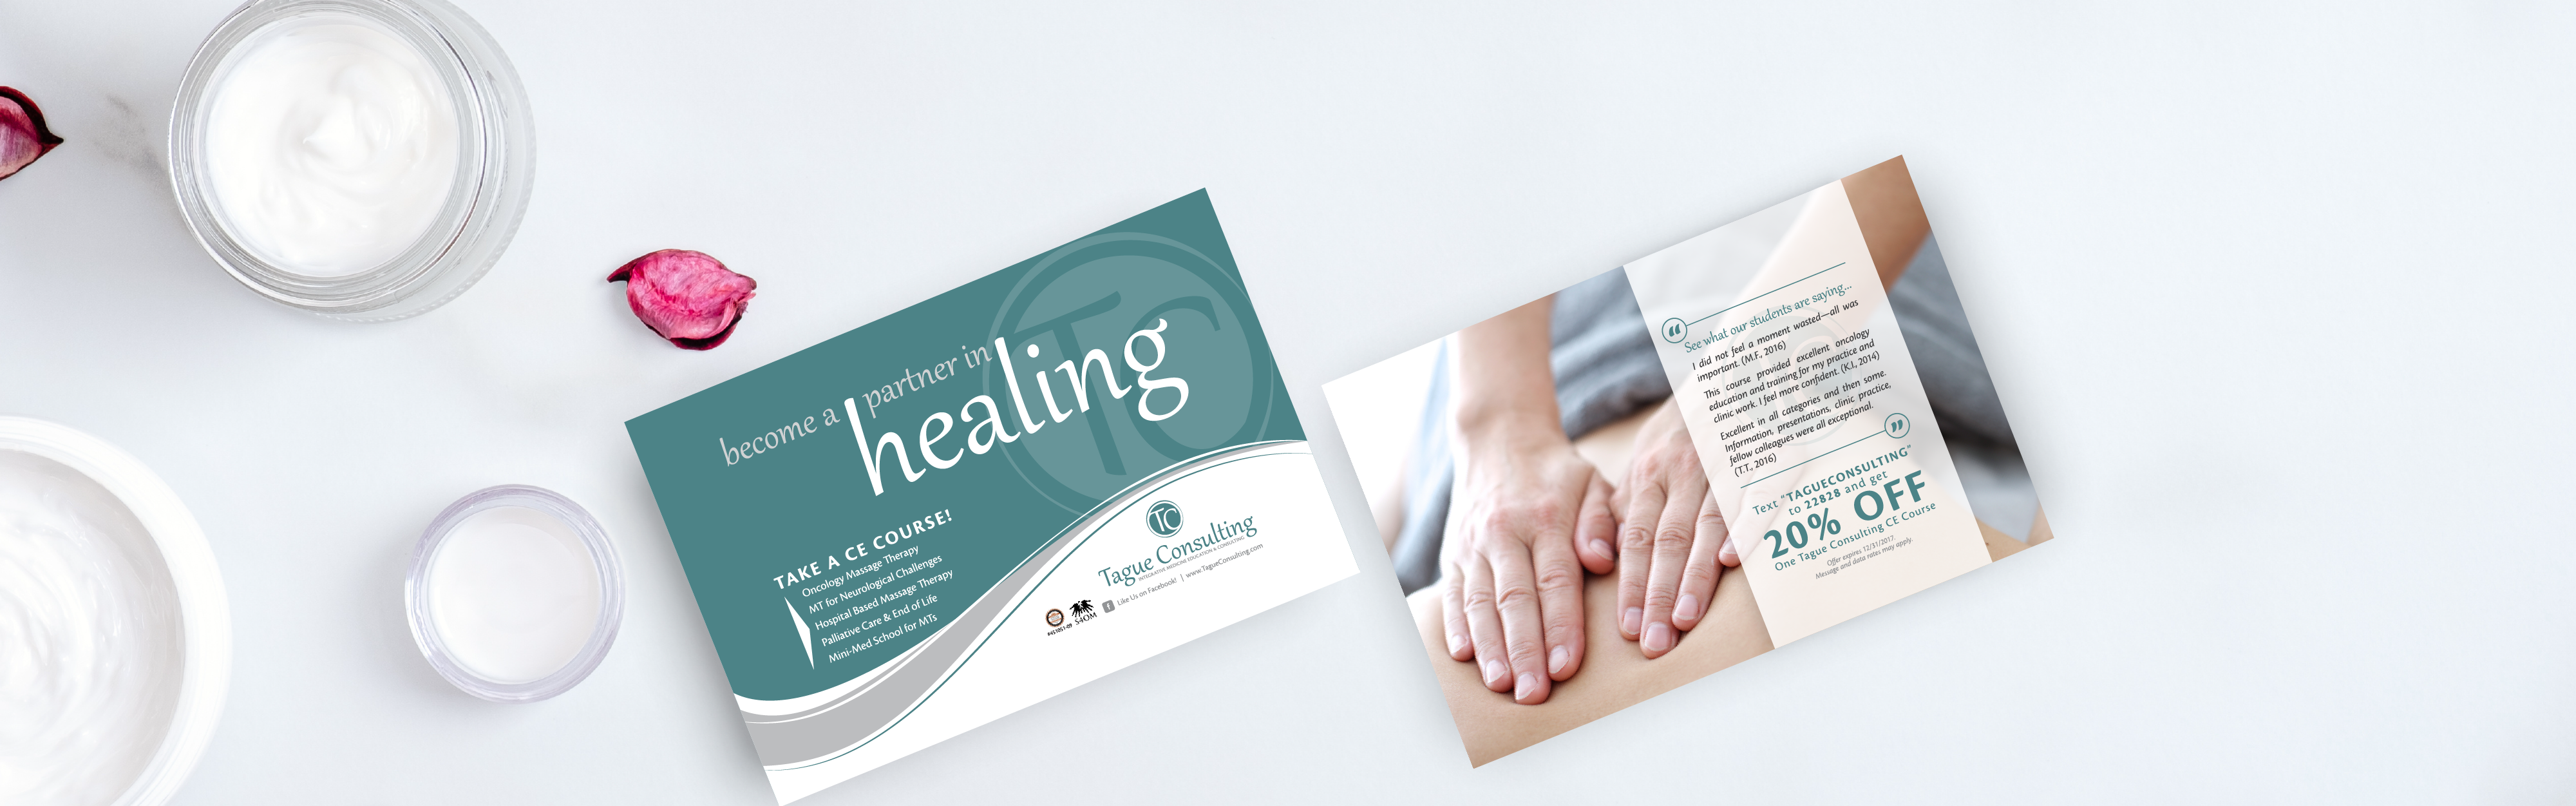 Two promotional brochures for Tague Consulting's healing and wellness service, placed next to a jar of cream and flower petals on a white surface.